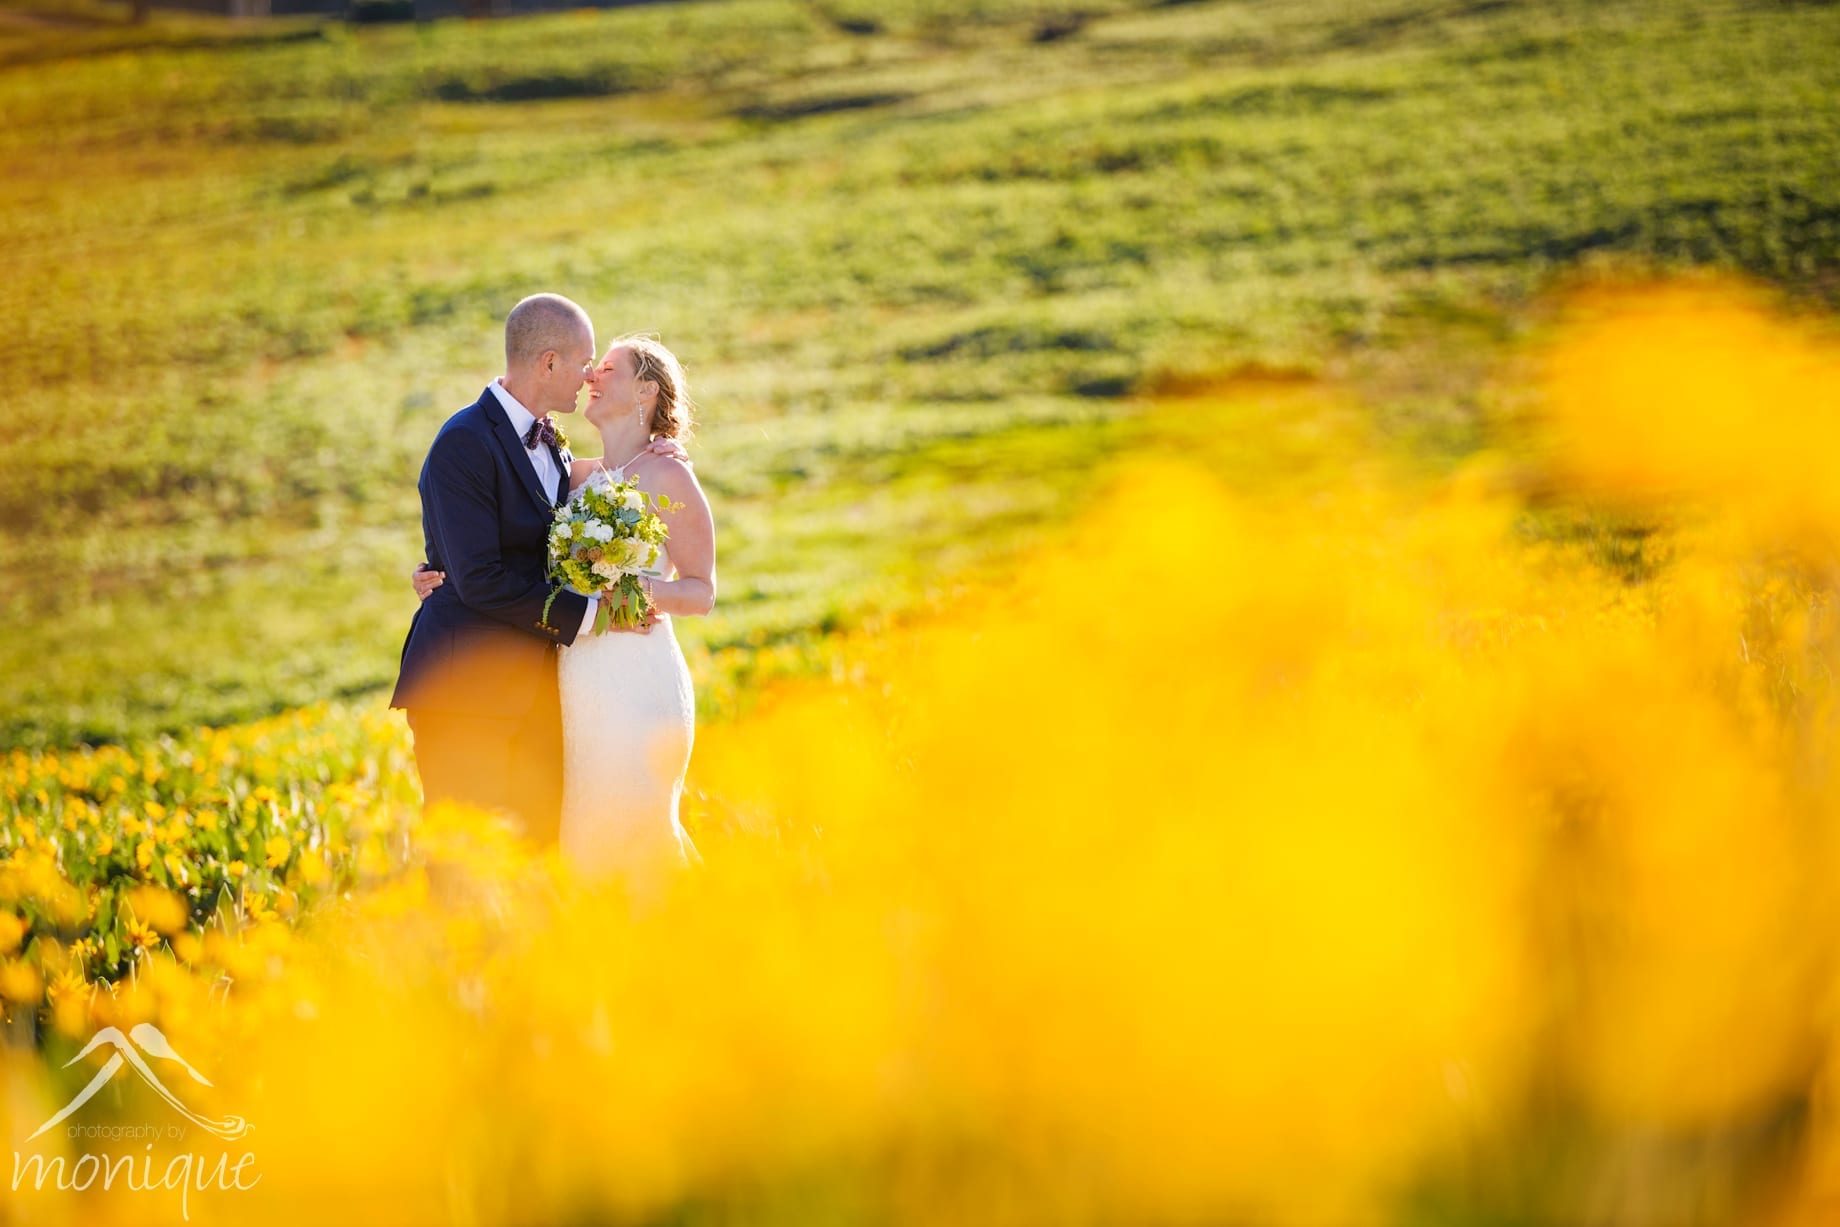 Squaw Valley High Camp wedding photography with the bride and groom in the yellow wild flowers